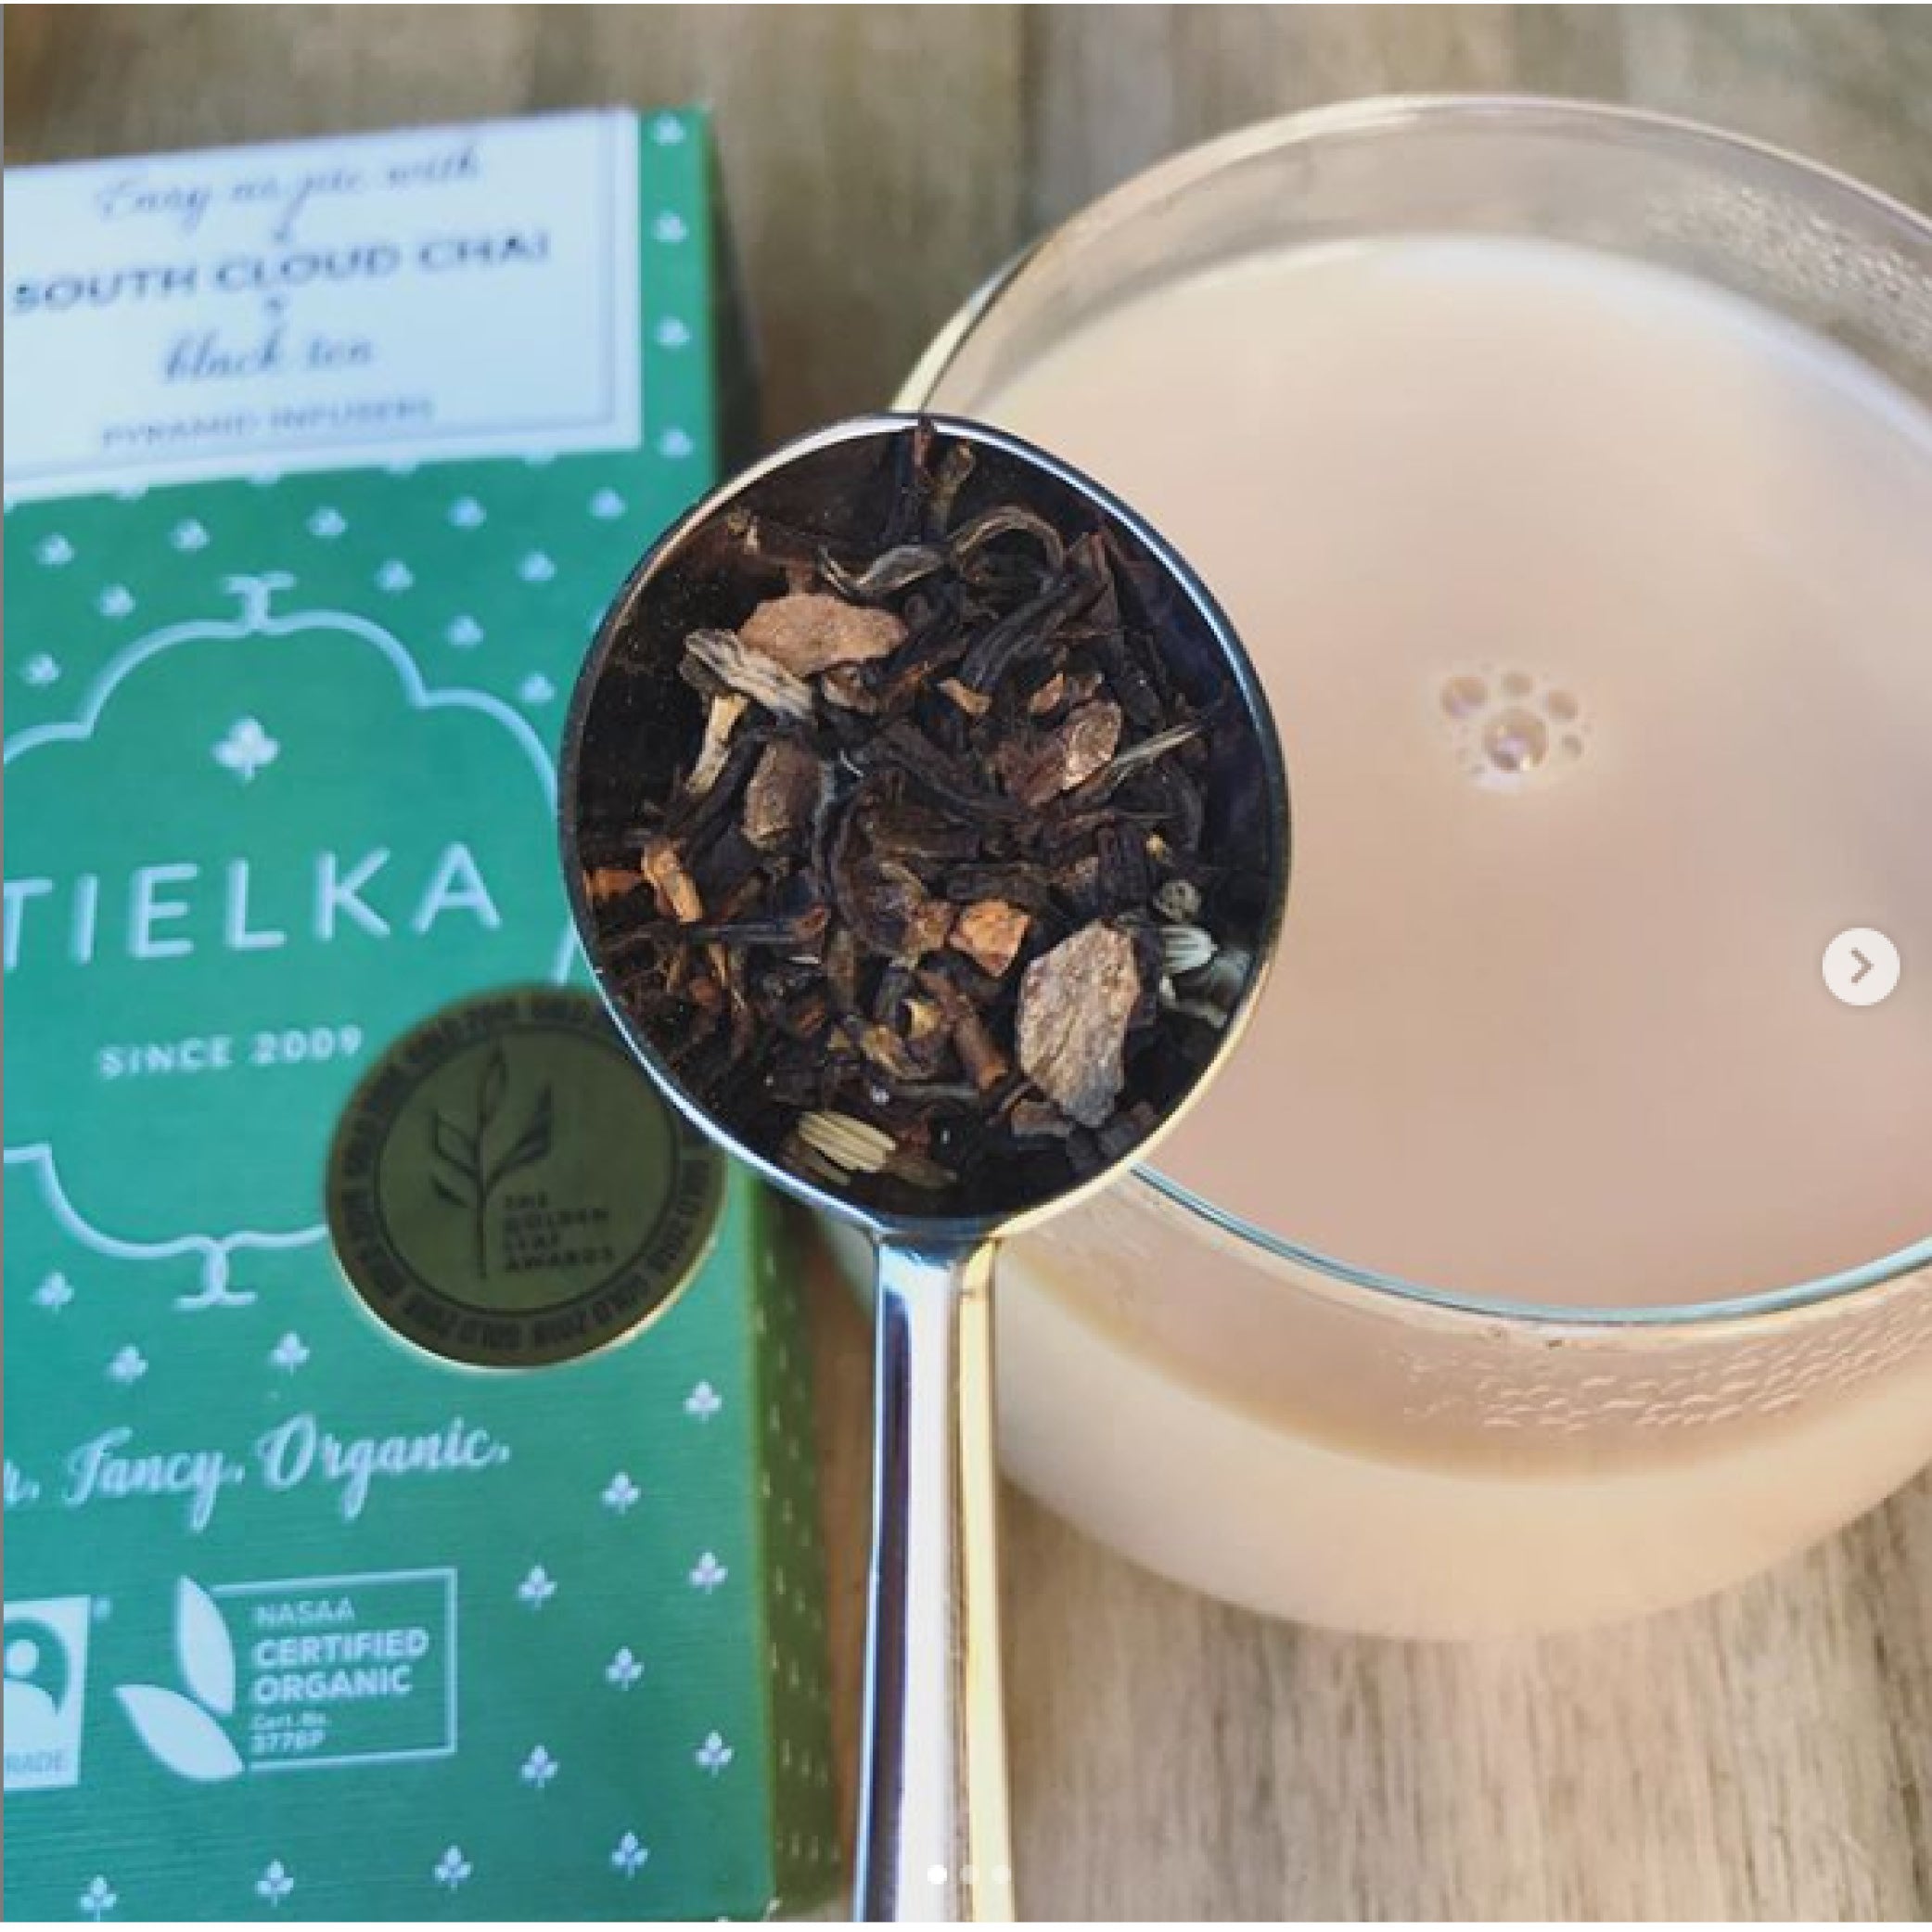 Tea Review by Brianna Drinks Tea of South Cloud Chai